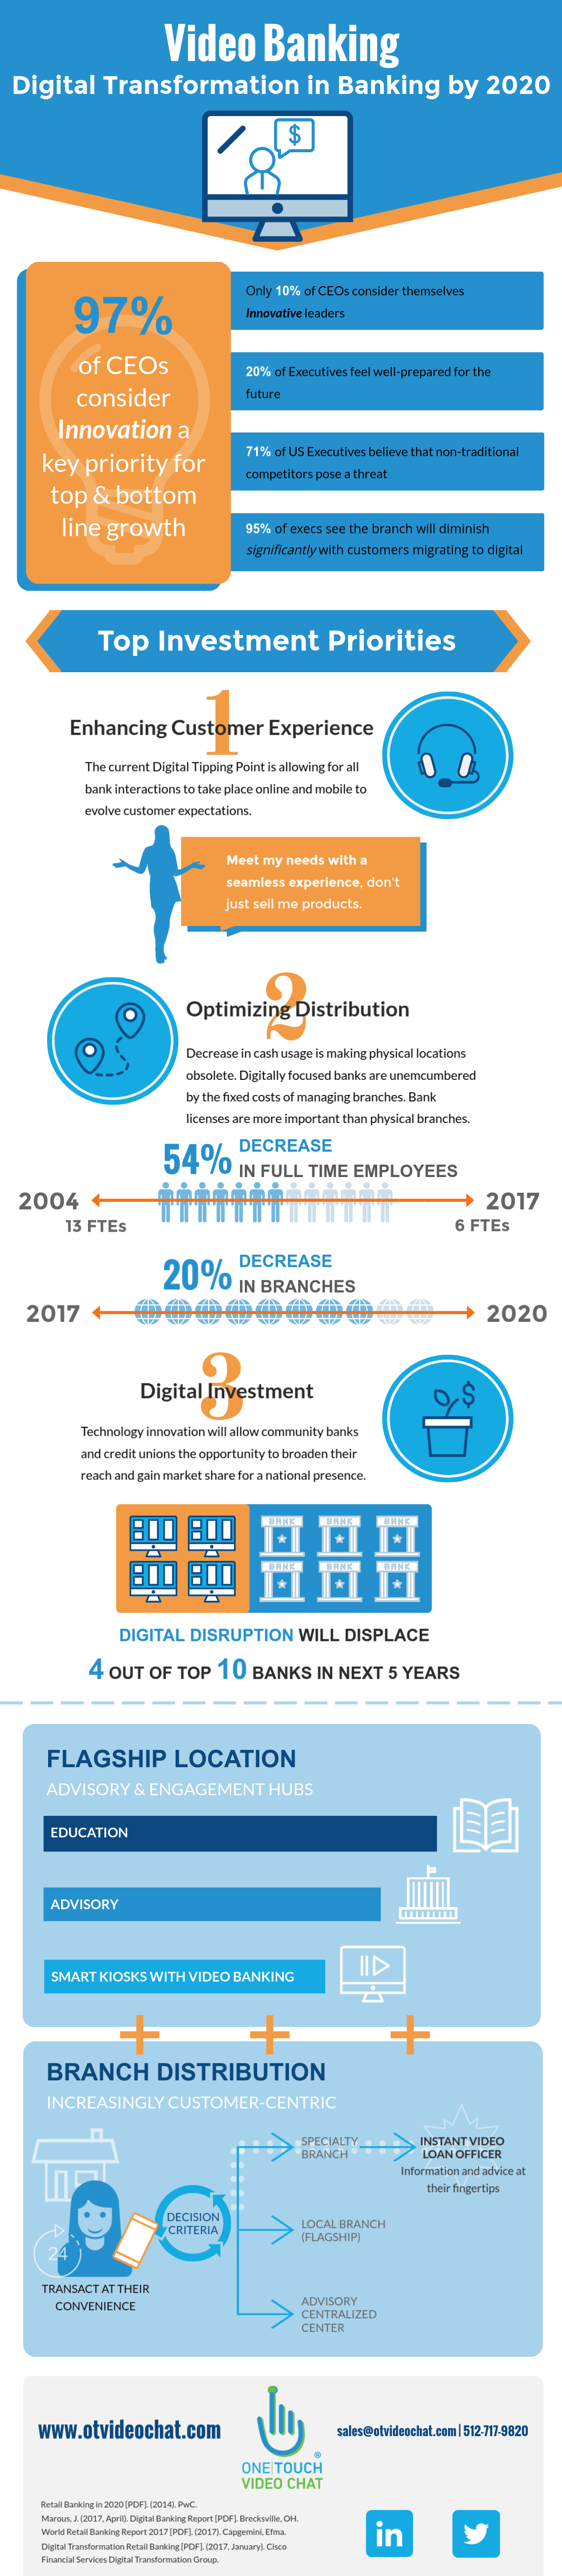 Digital Transformation in Banking by 2020 Infographic